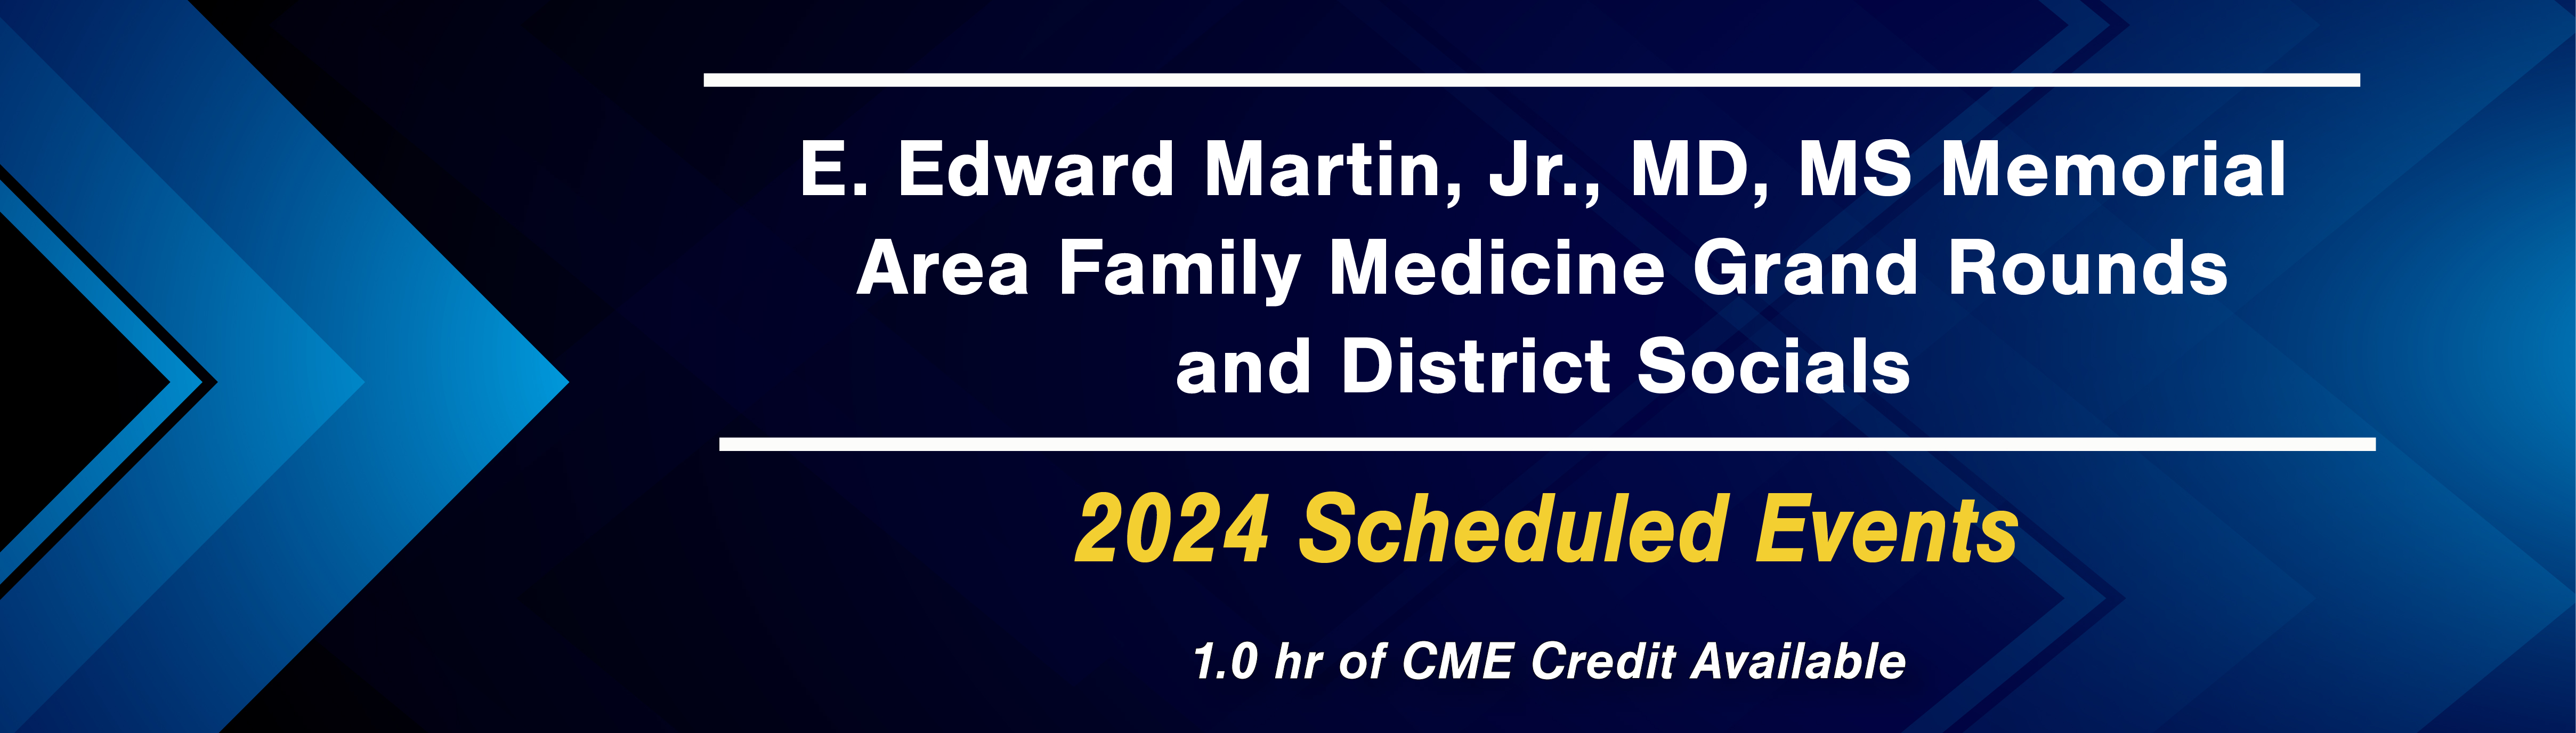 2024 Grand Rounds web banner 01